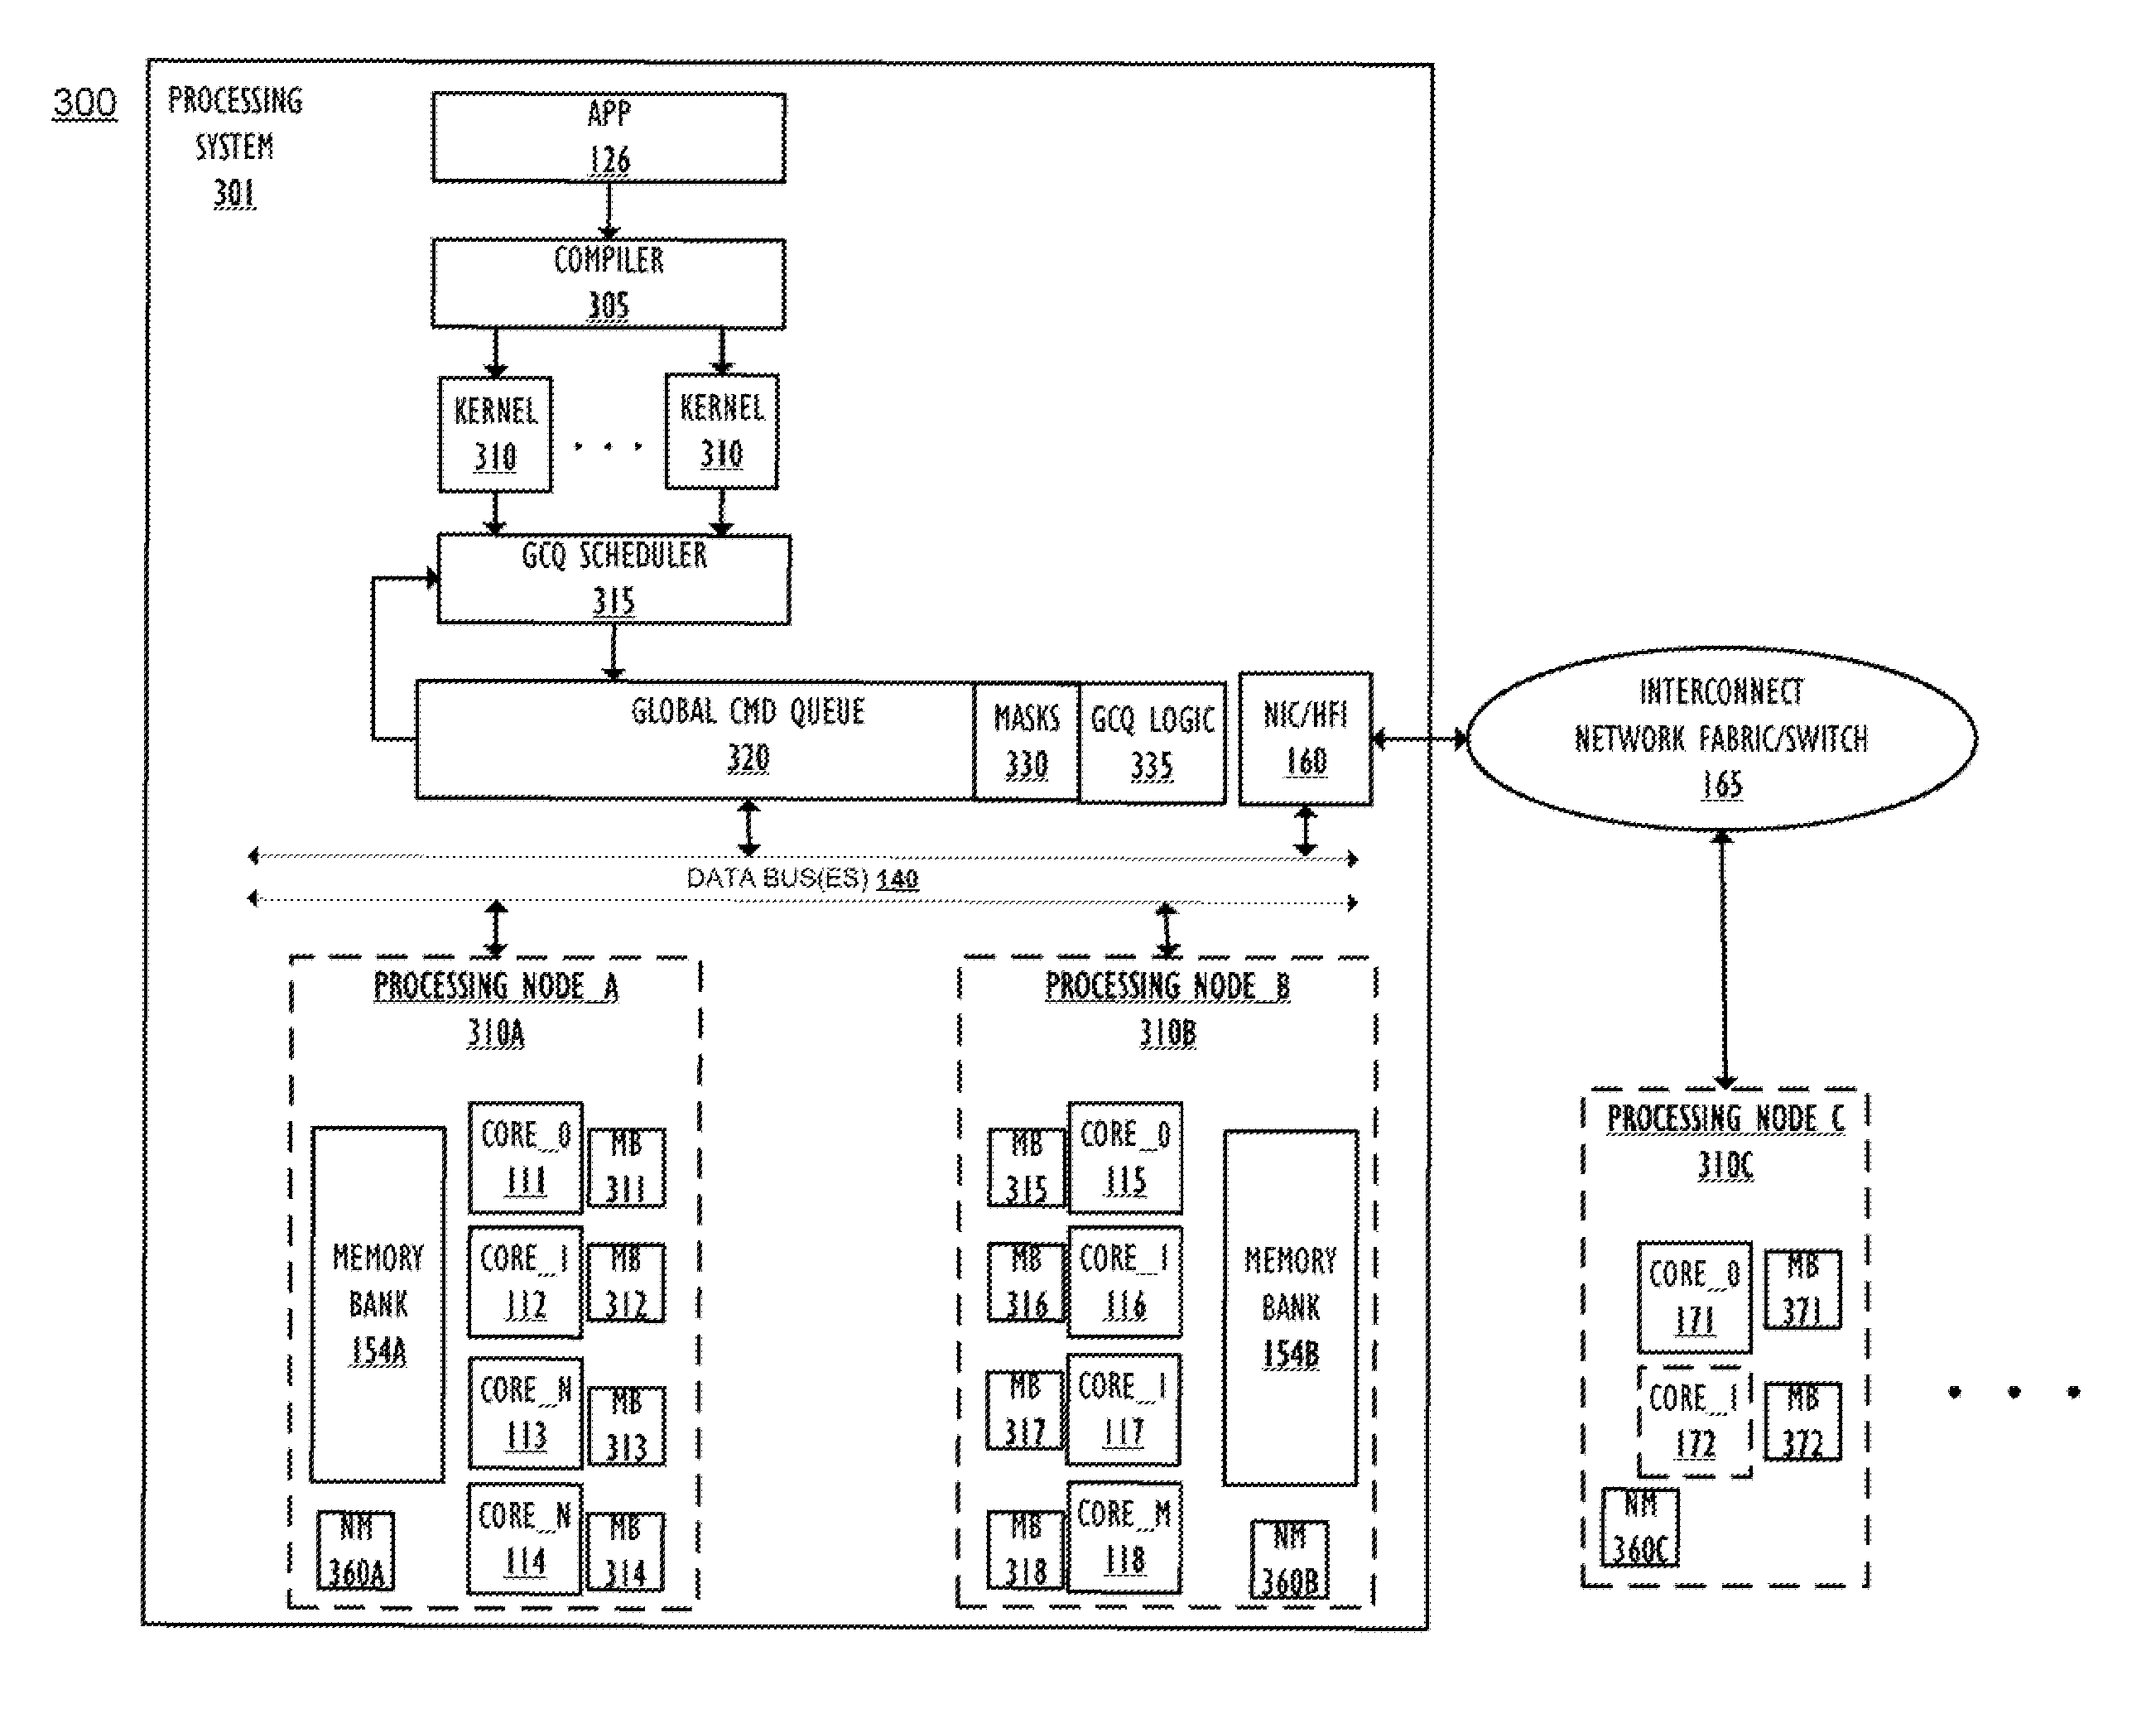 Method to reduce queue synchronization of multiple work items in a system with high memory latency between processing nodes